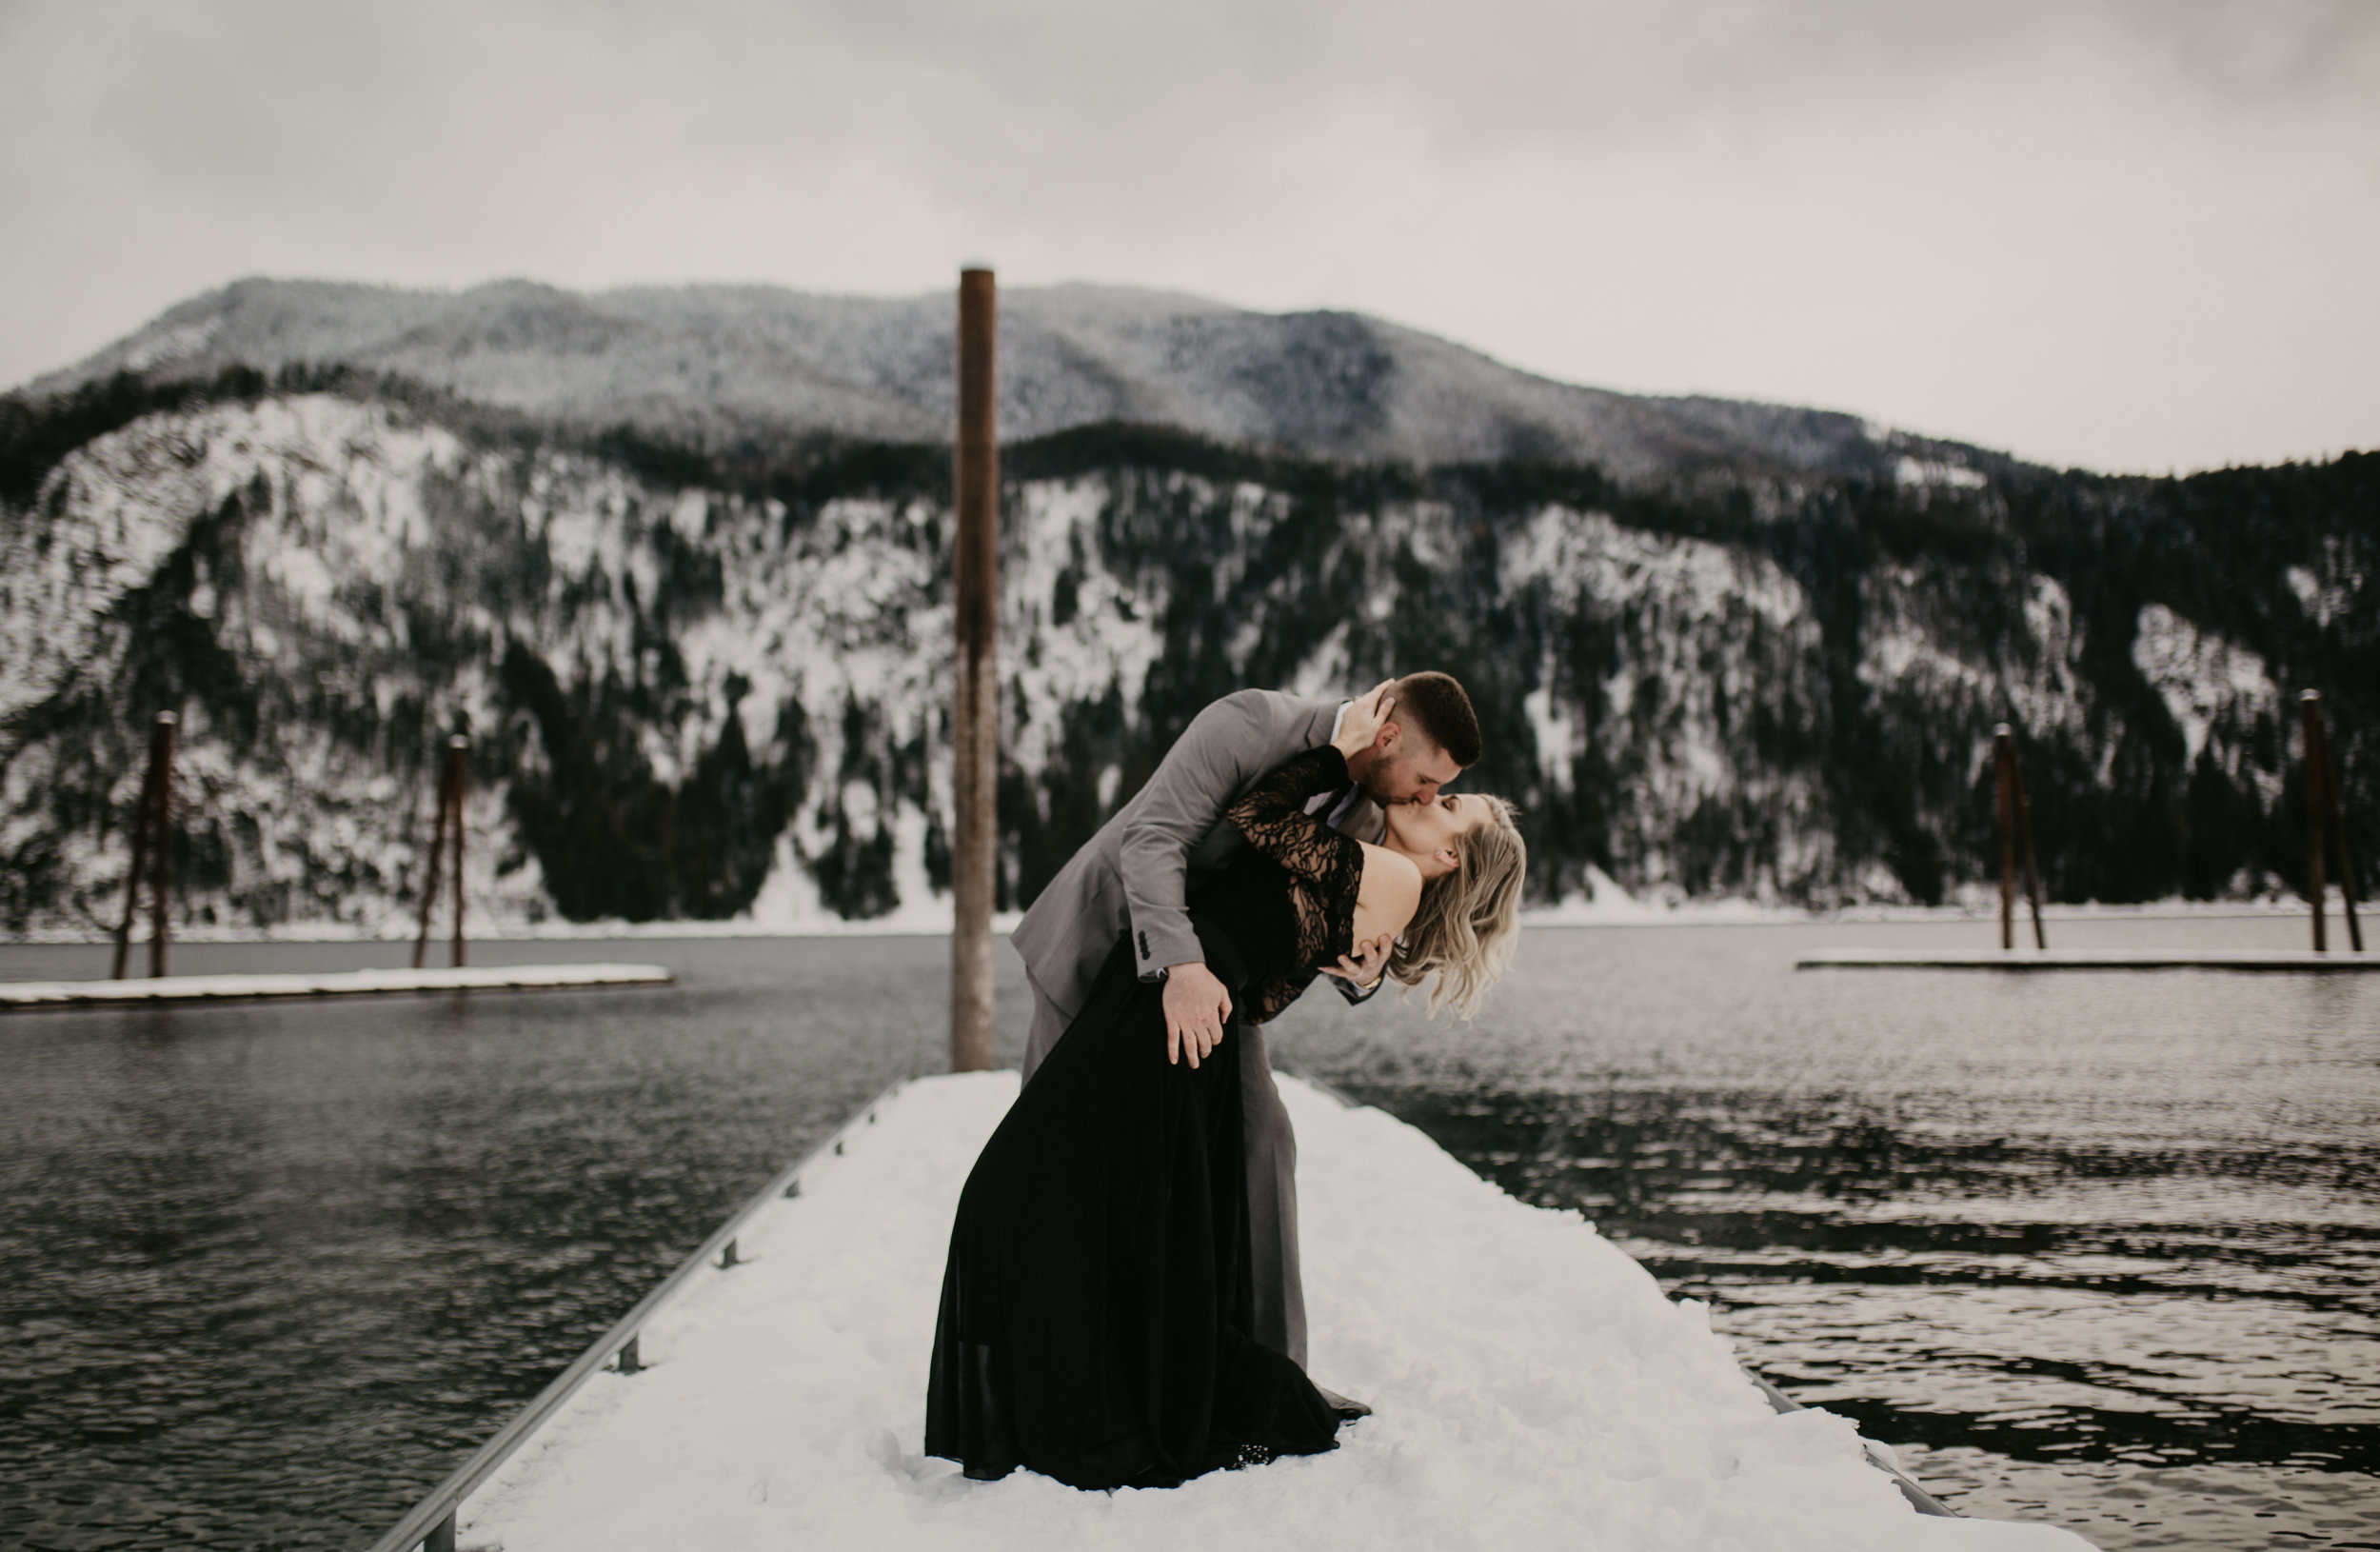  Intimate Bride and Groom wedding session in Idaho 